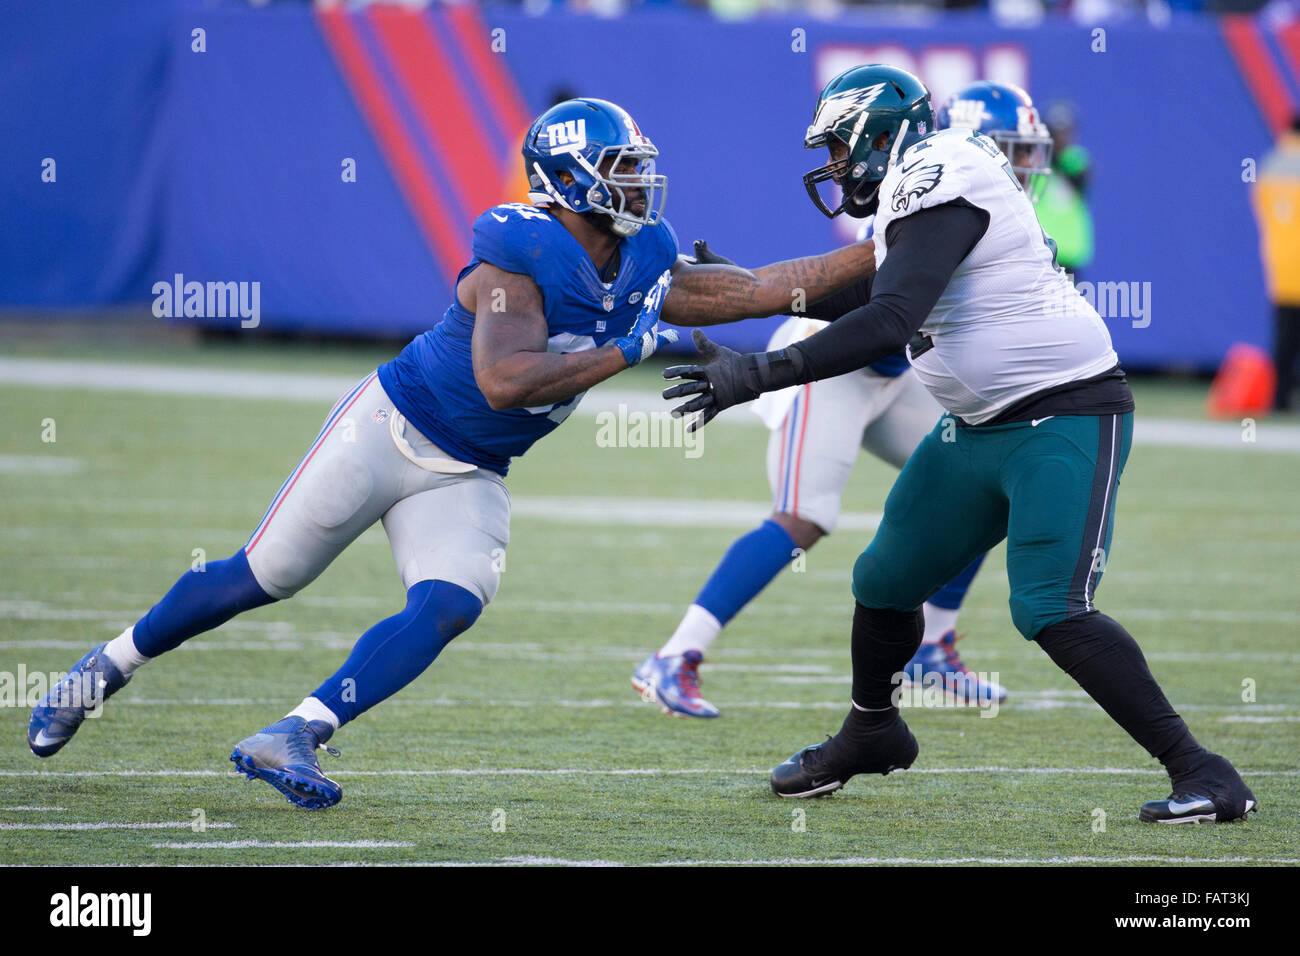 East Rutherford, New Jersey, USA. 3rd Jan, 2016. New York Giants defensive end Robert Ayers (91) goes up against Philadelphia Eagles tackle Jason Peters (71) during the NFL game between the Philadelphia Eagles and the New York Giants at MetLife Stadium in East Rutherford, New Jersey. The Philadelphia Eagles won 35-30. Christopher Szagola/CSM/Alamy Live News Stock Photo